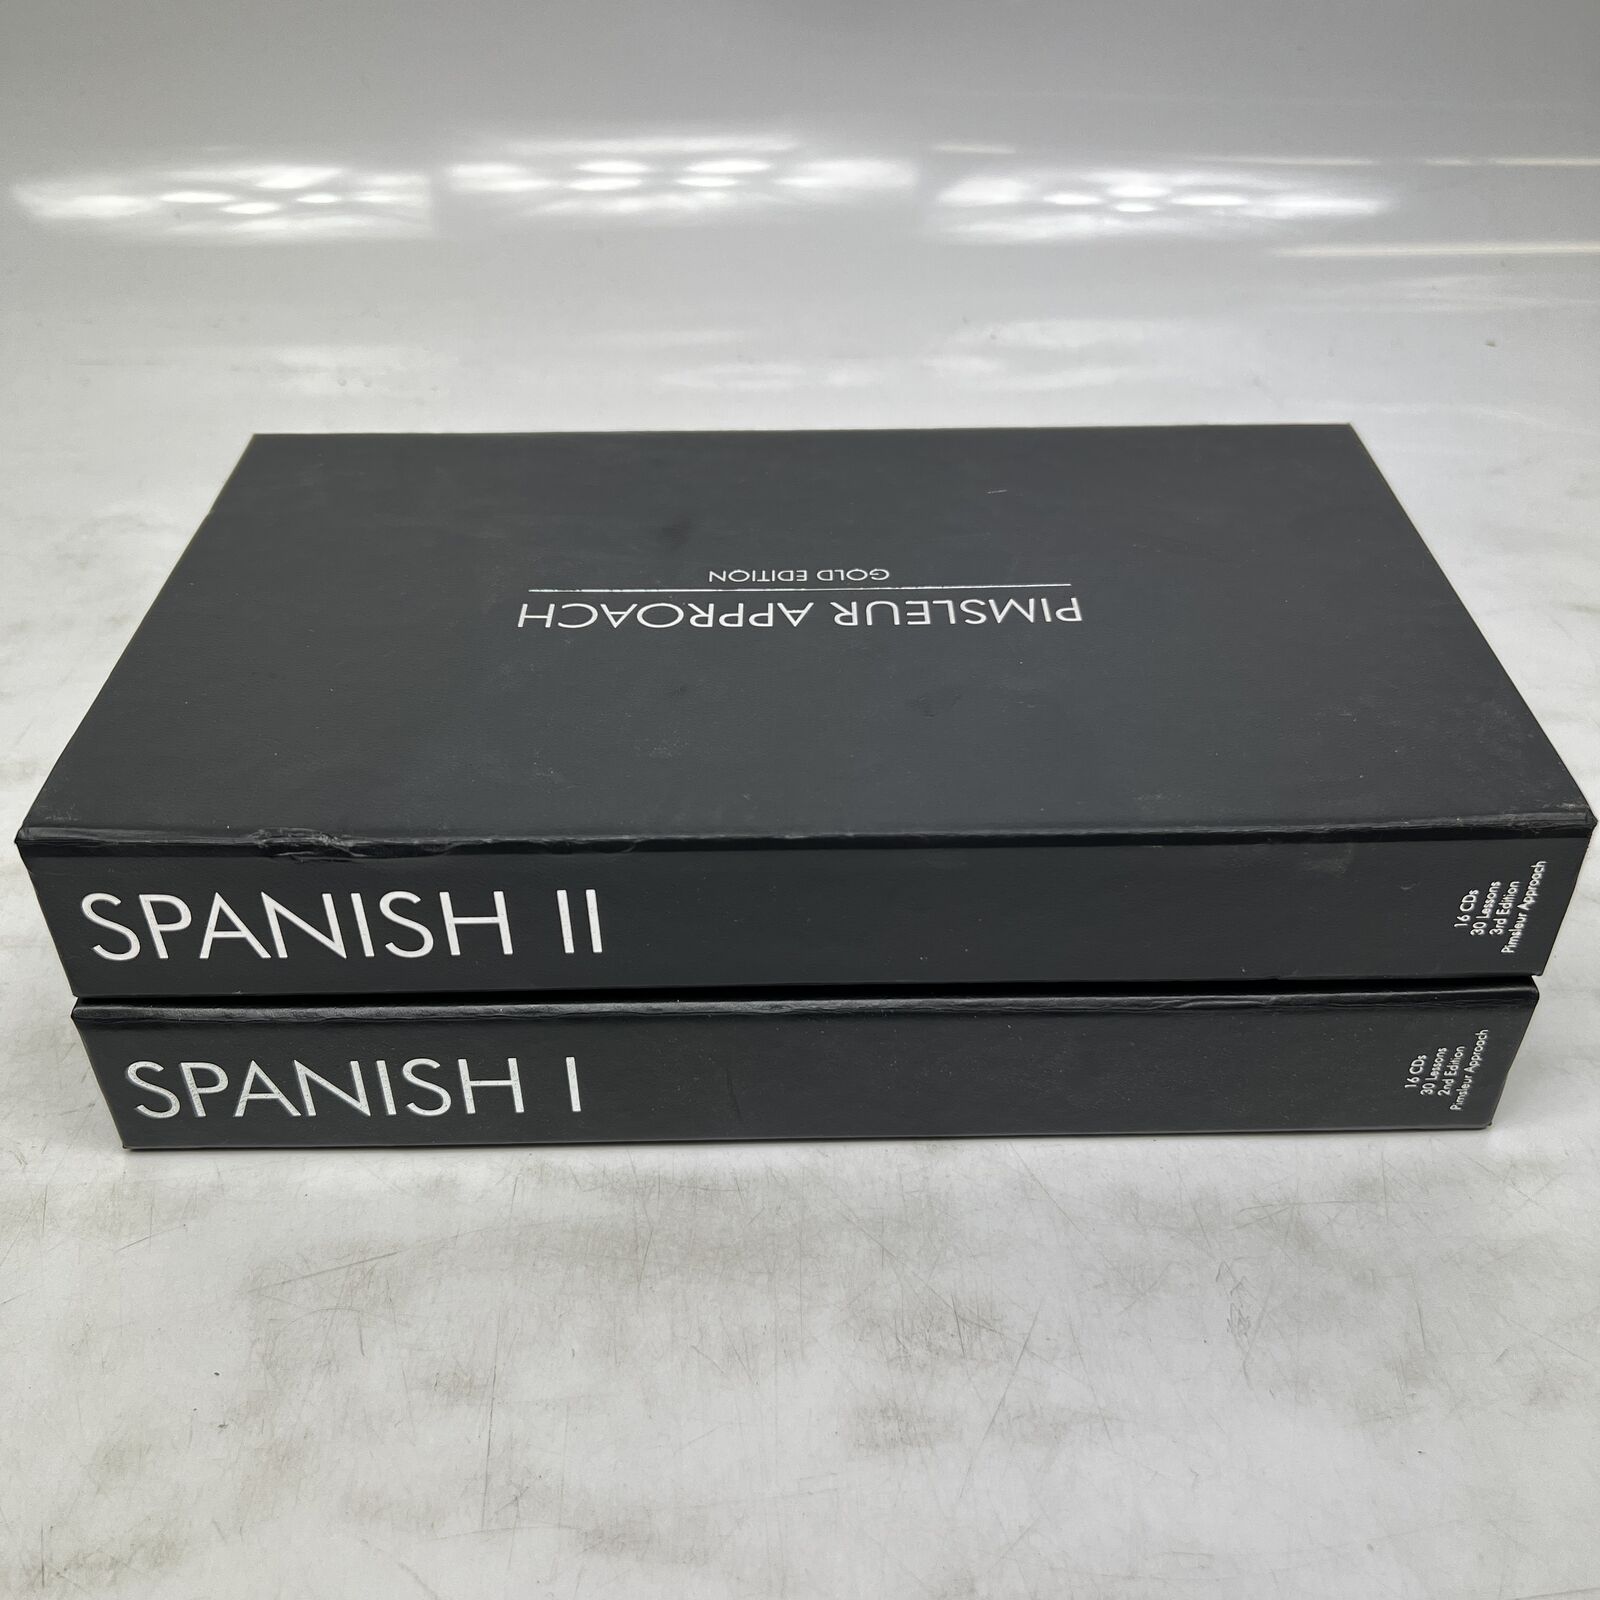 Compleat Set Of Spanish 1 & 2 Pimsler Approach 30 Lesson CD\'s (16 CD\'s Each)